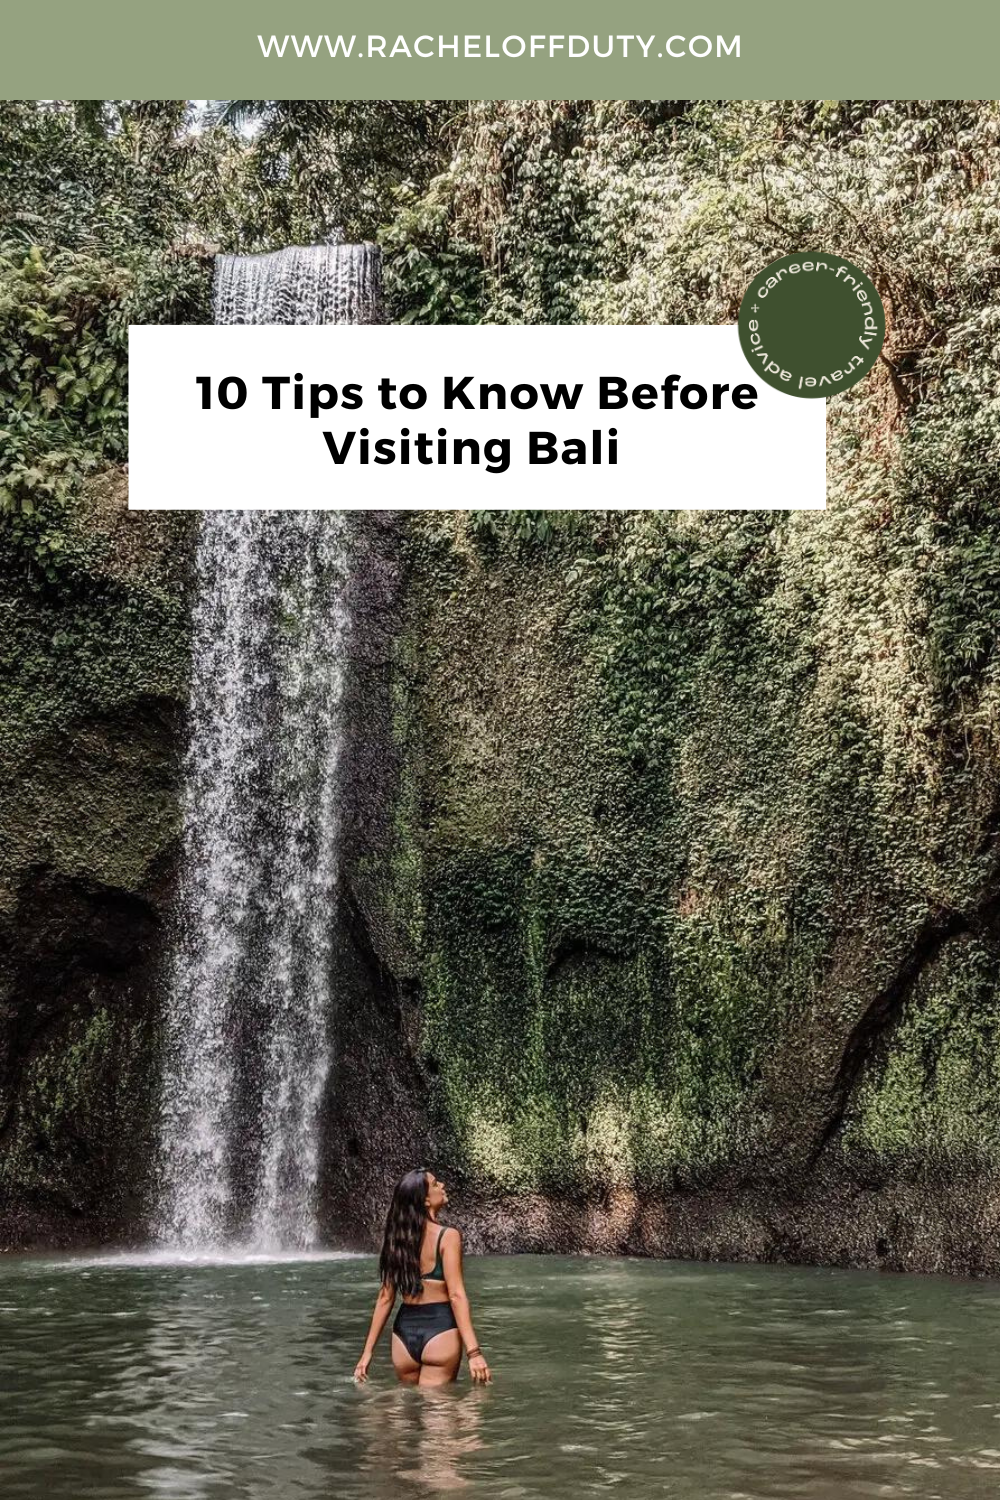 Rachel Off Duty: 10 Tips to Know Before Visiting Bali